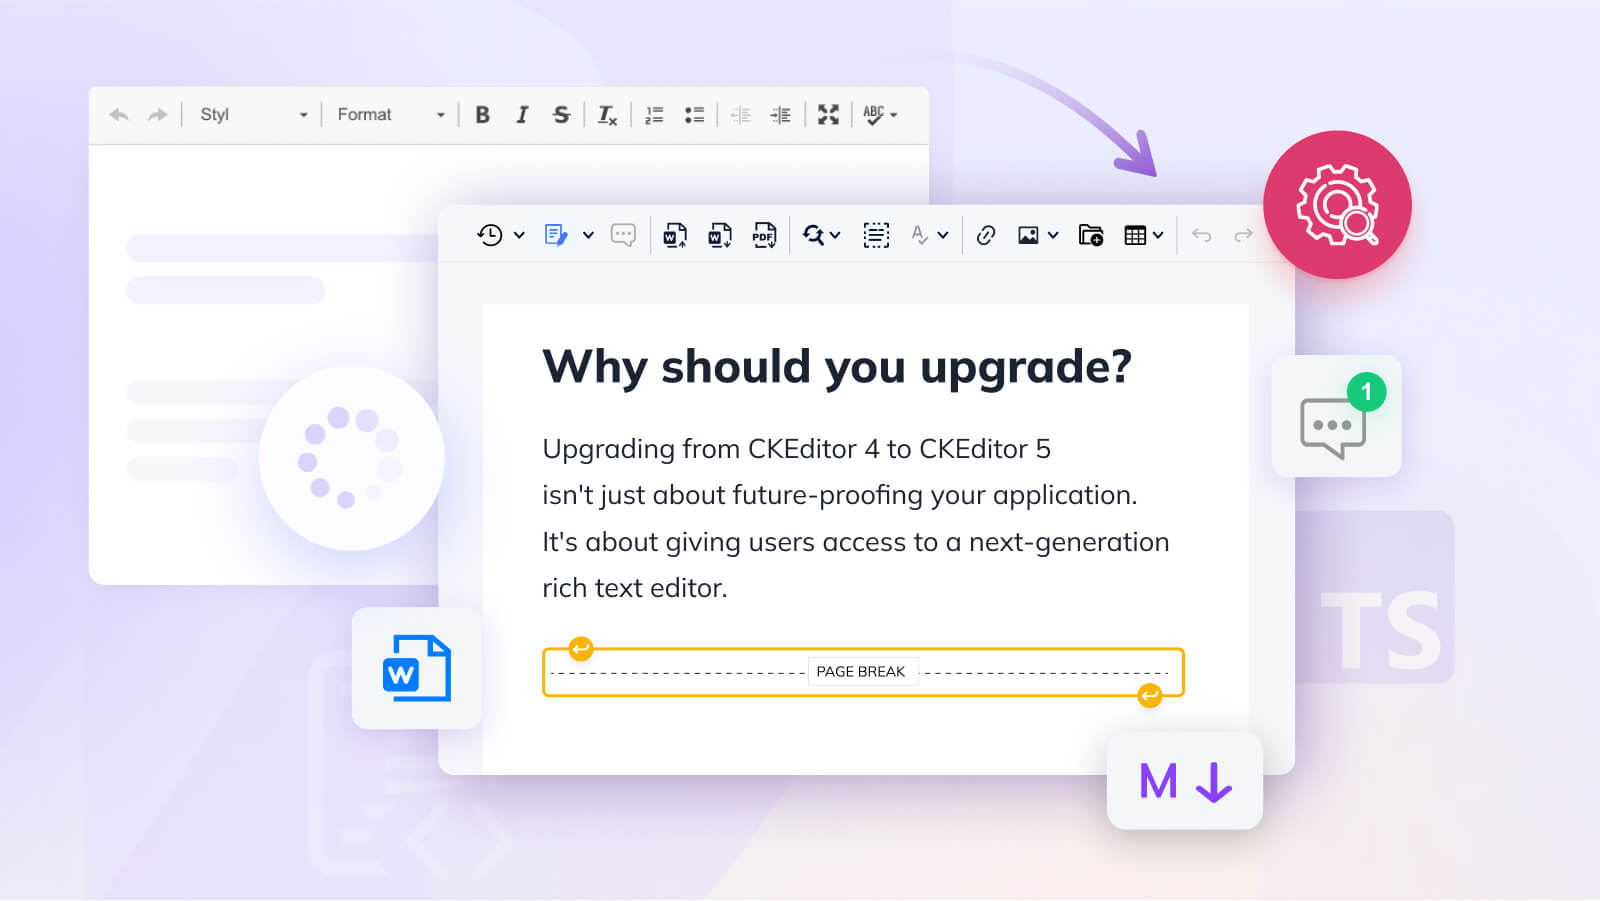 How to upgrade from CKEditor 4 to 5 | CKEditor